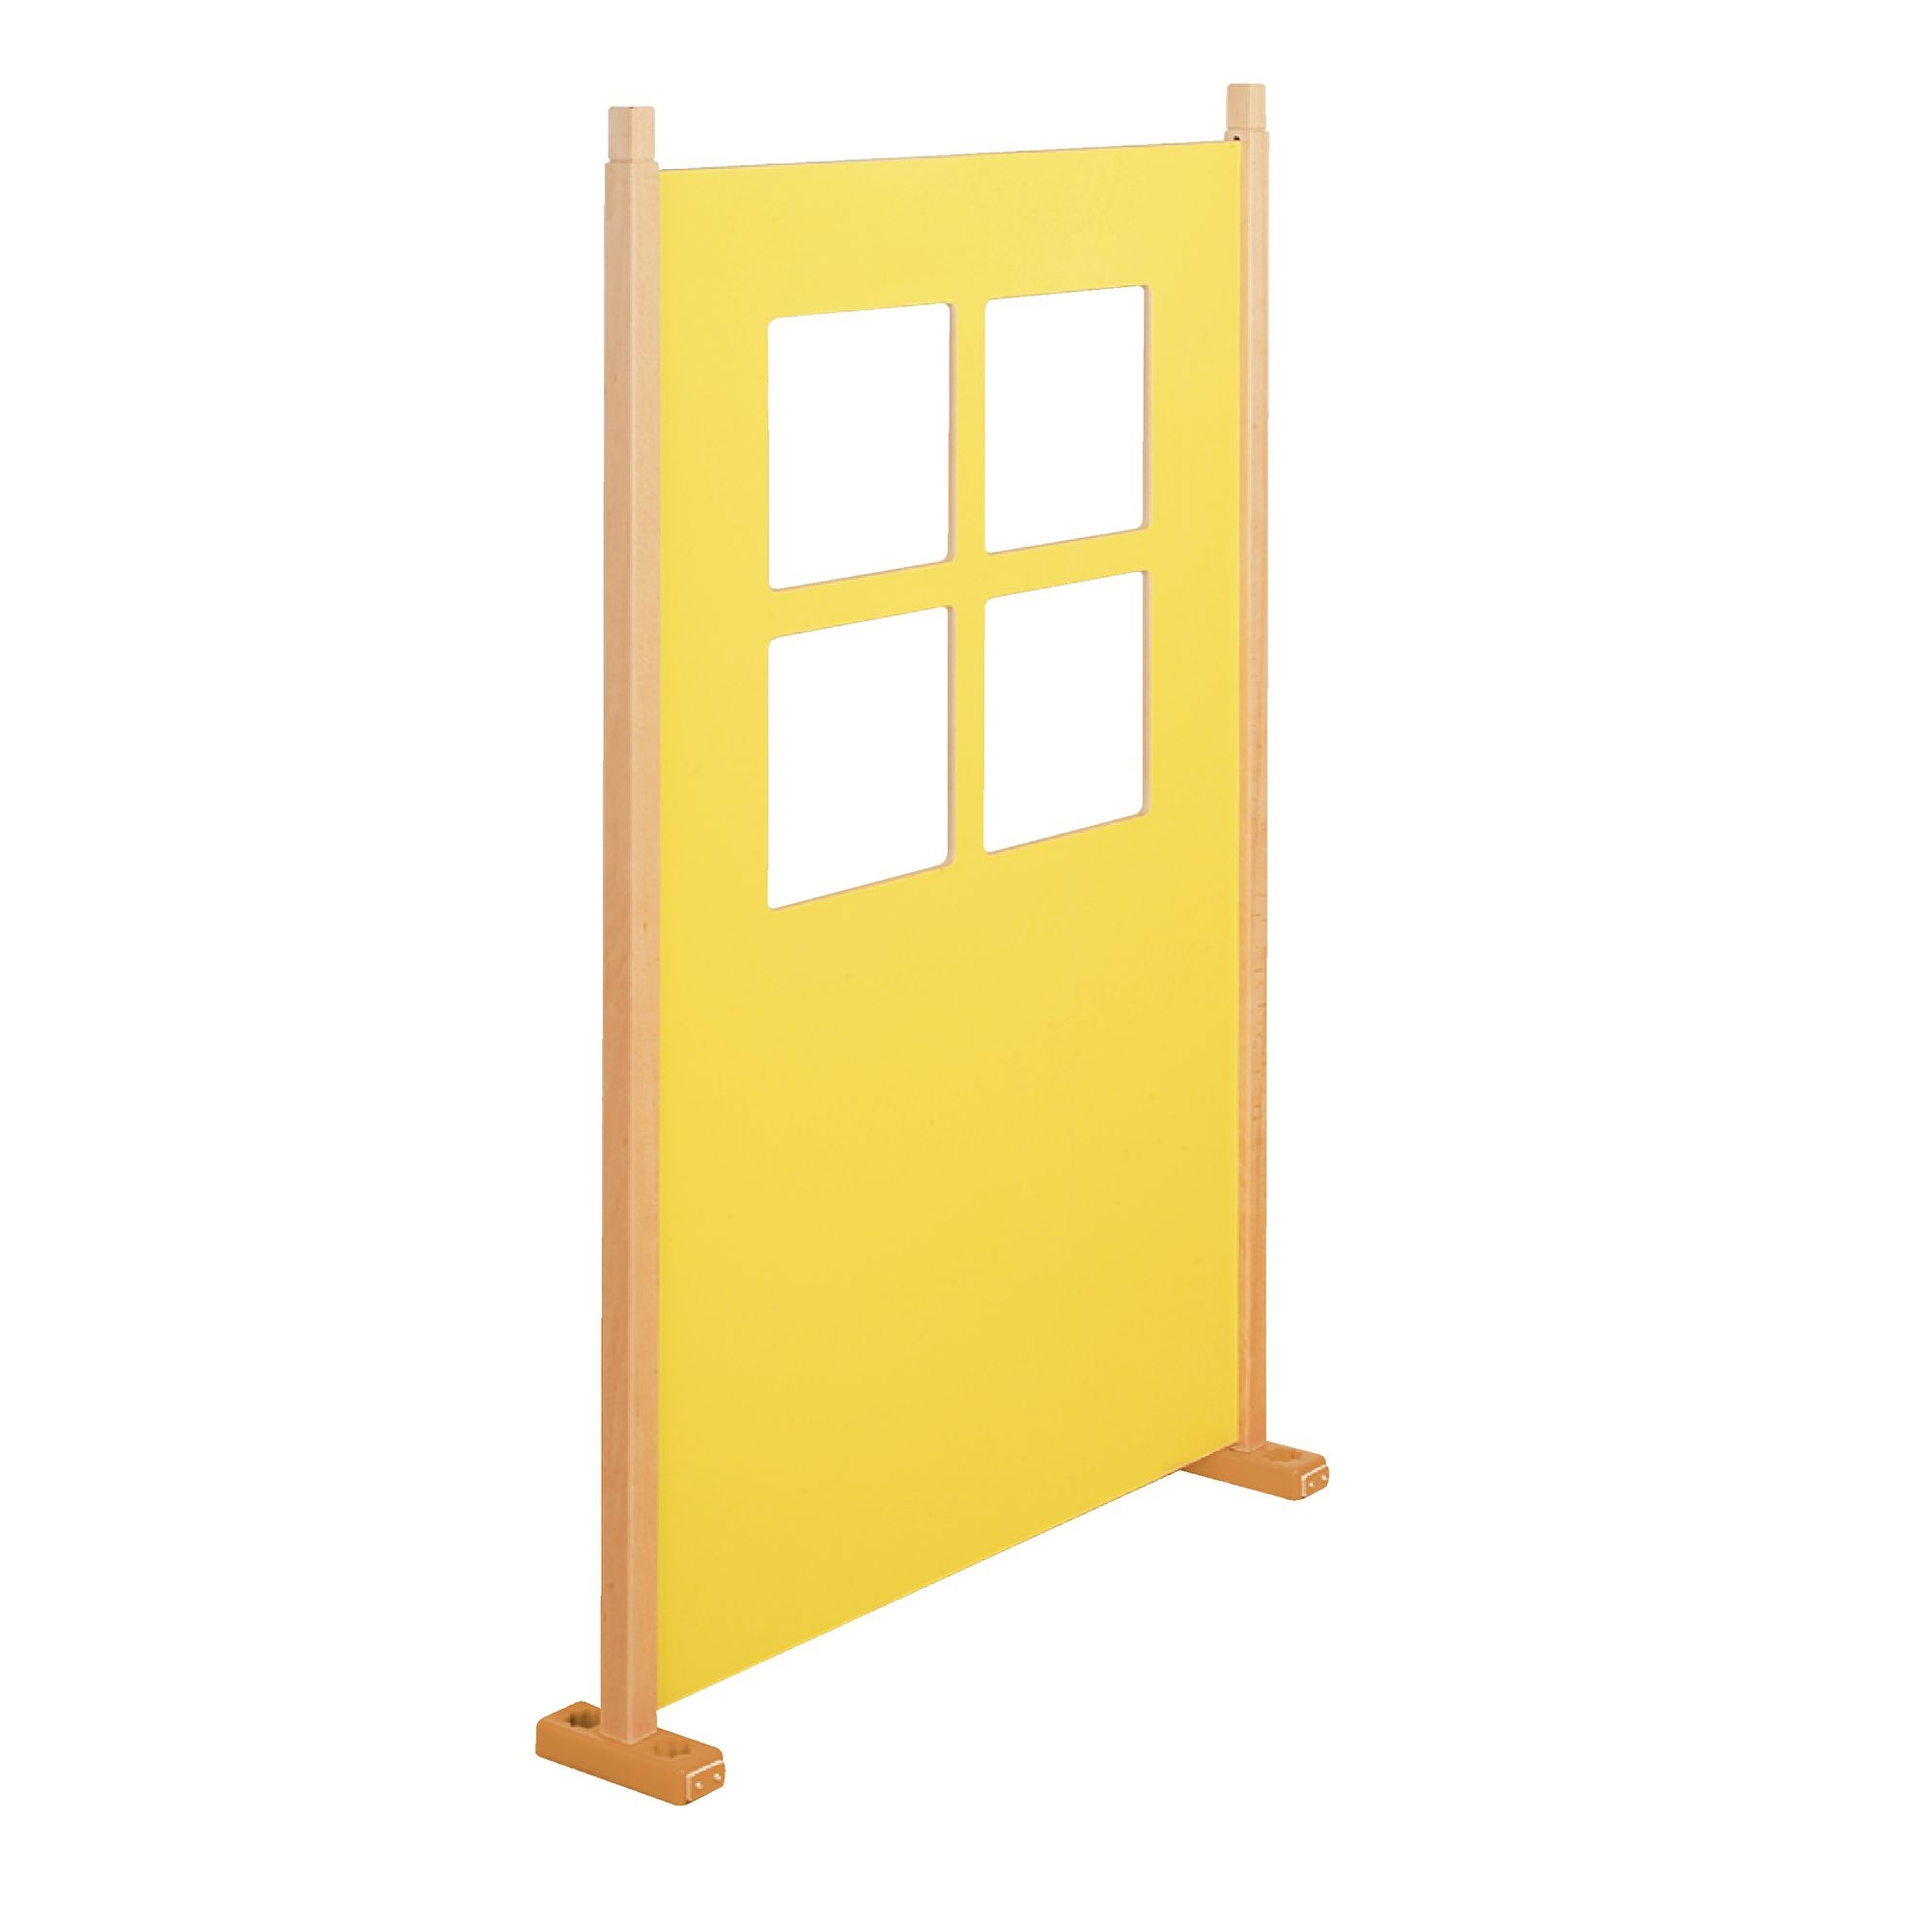 Millhouse - Role Play Panels - Square Window